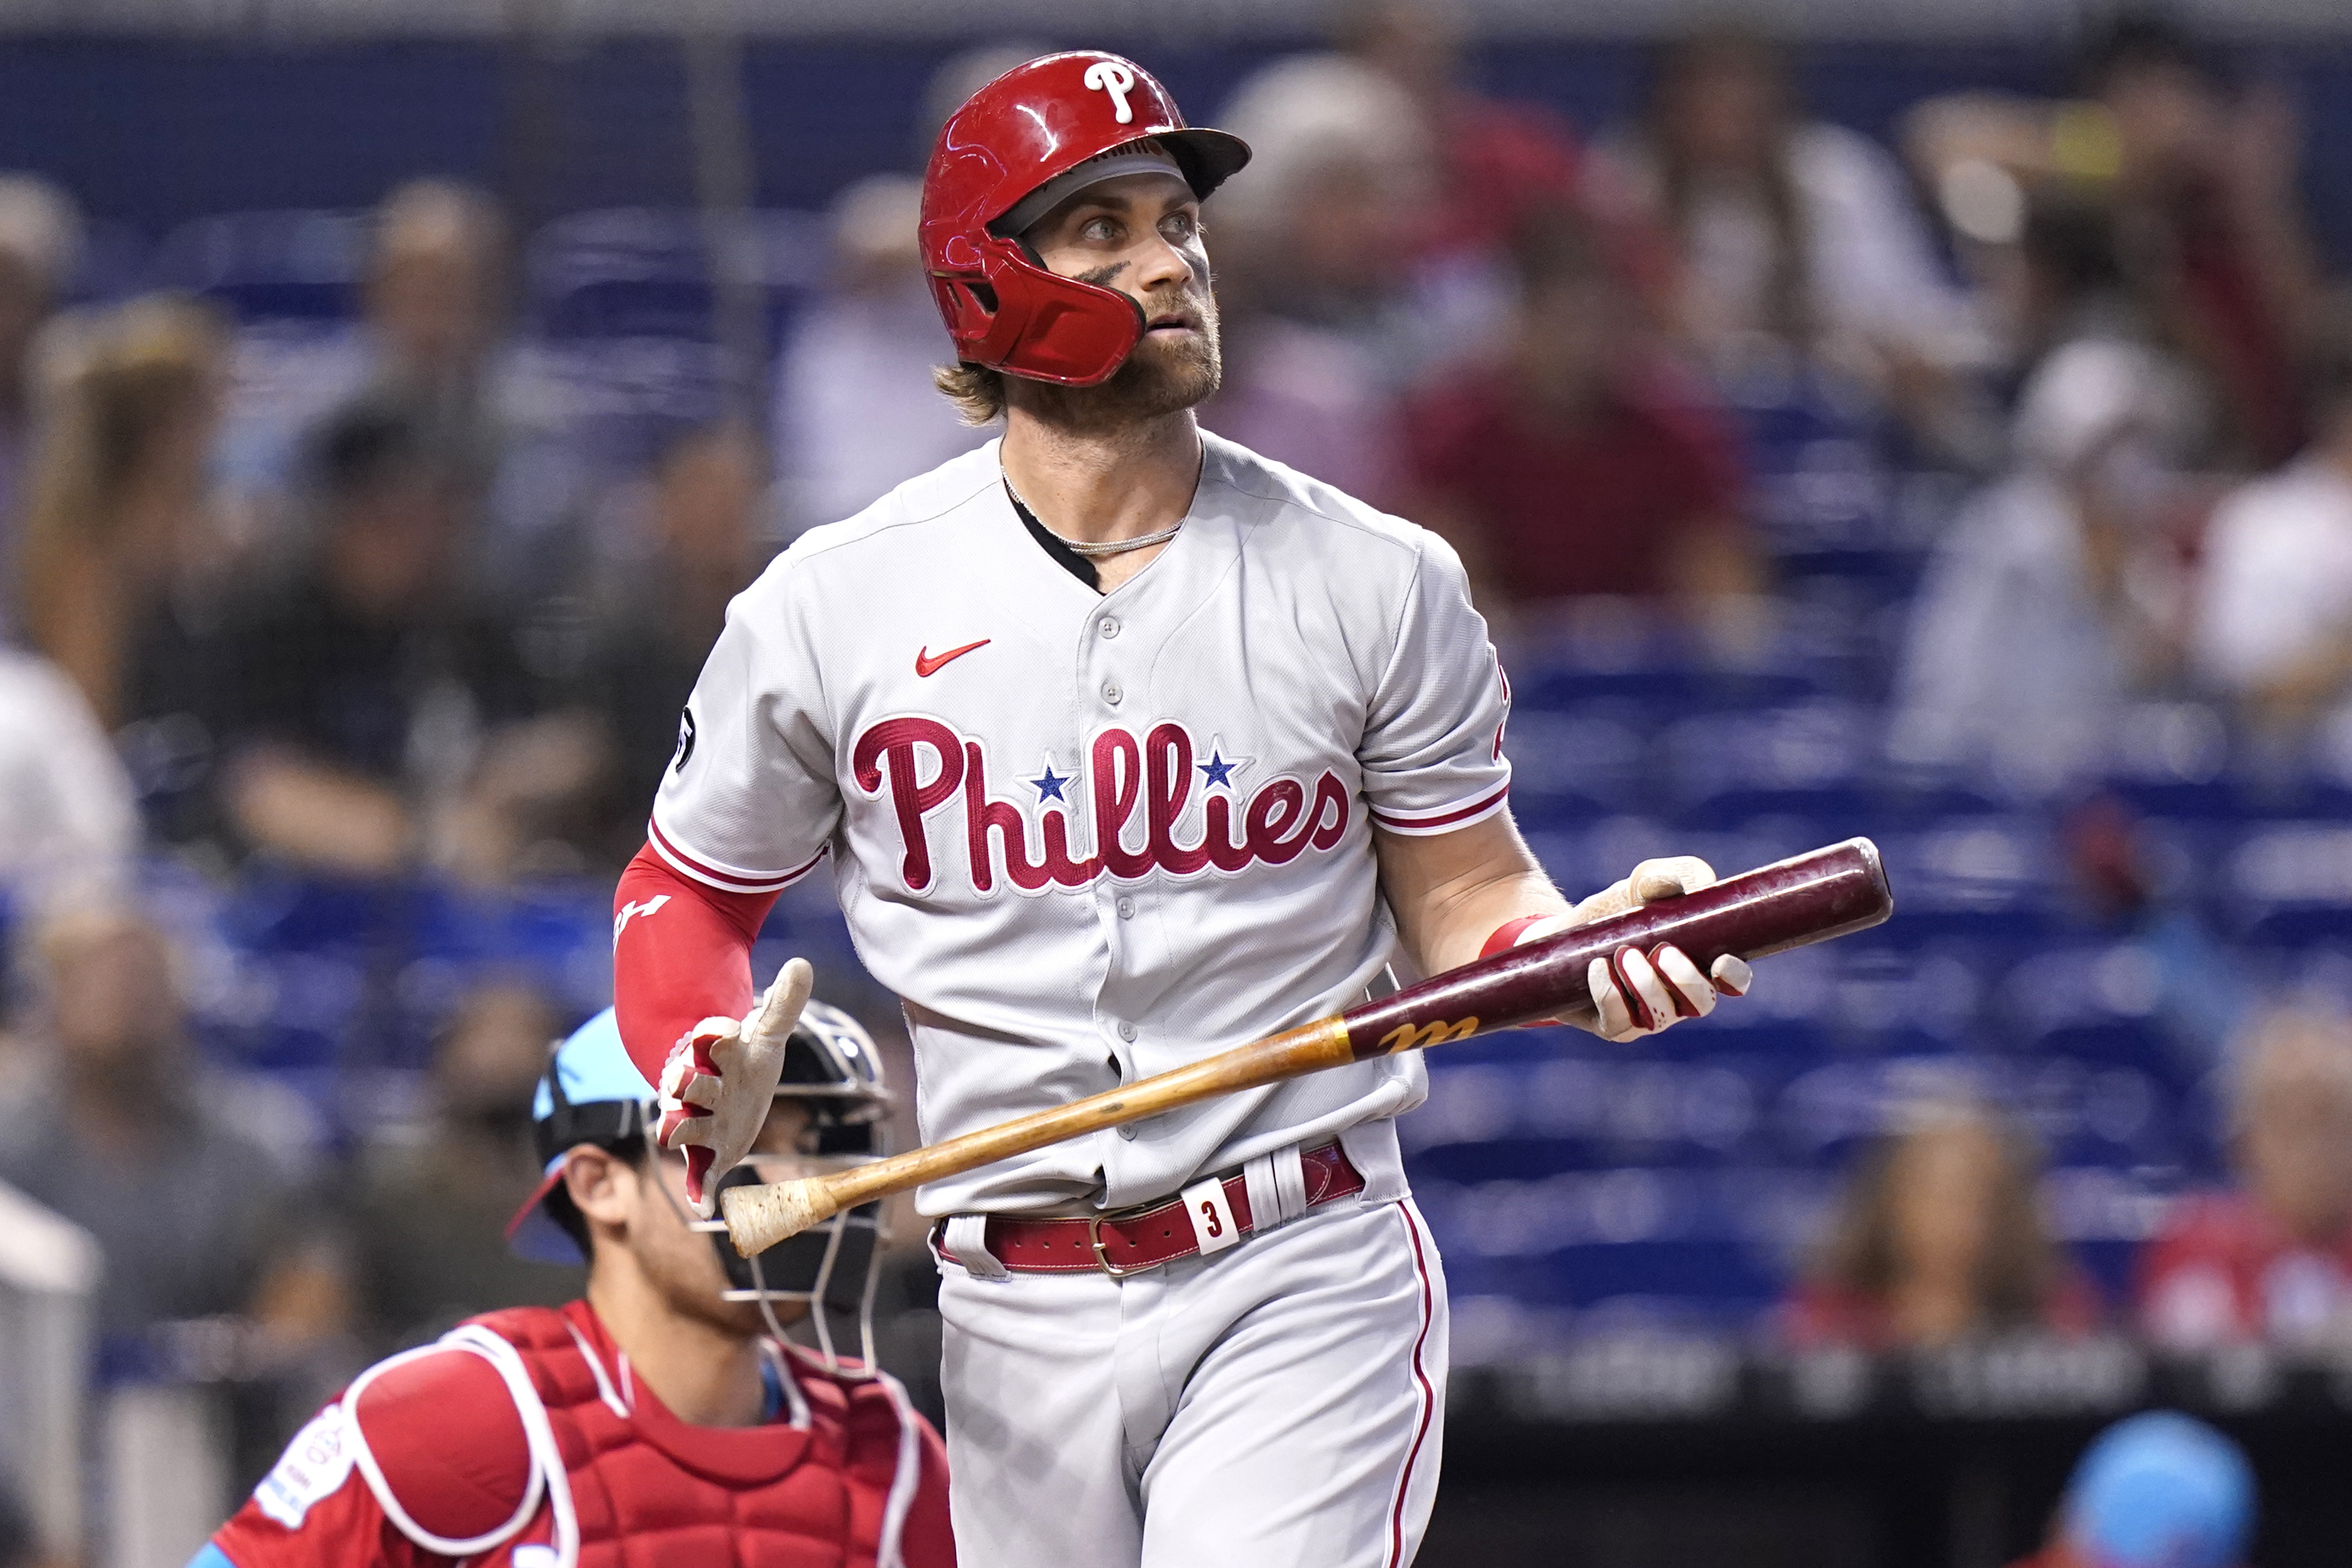 Bryce Harper returns to Phillies' lineup after PRP injection